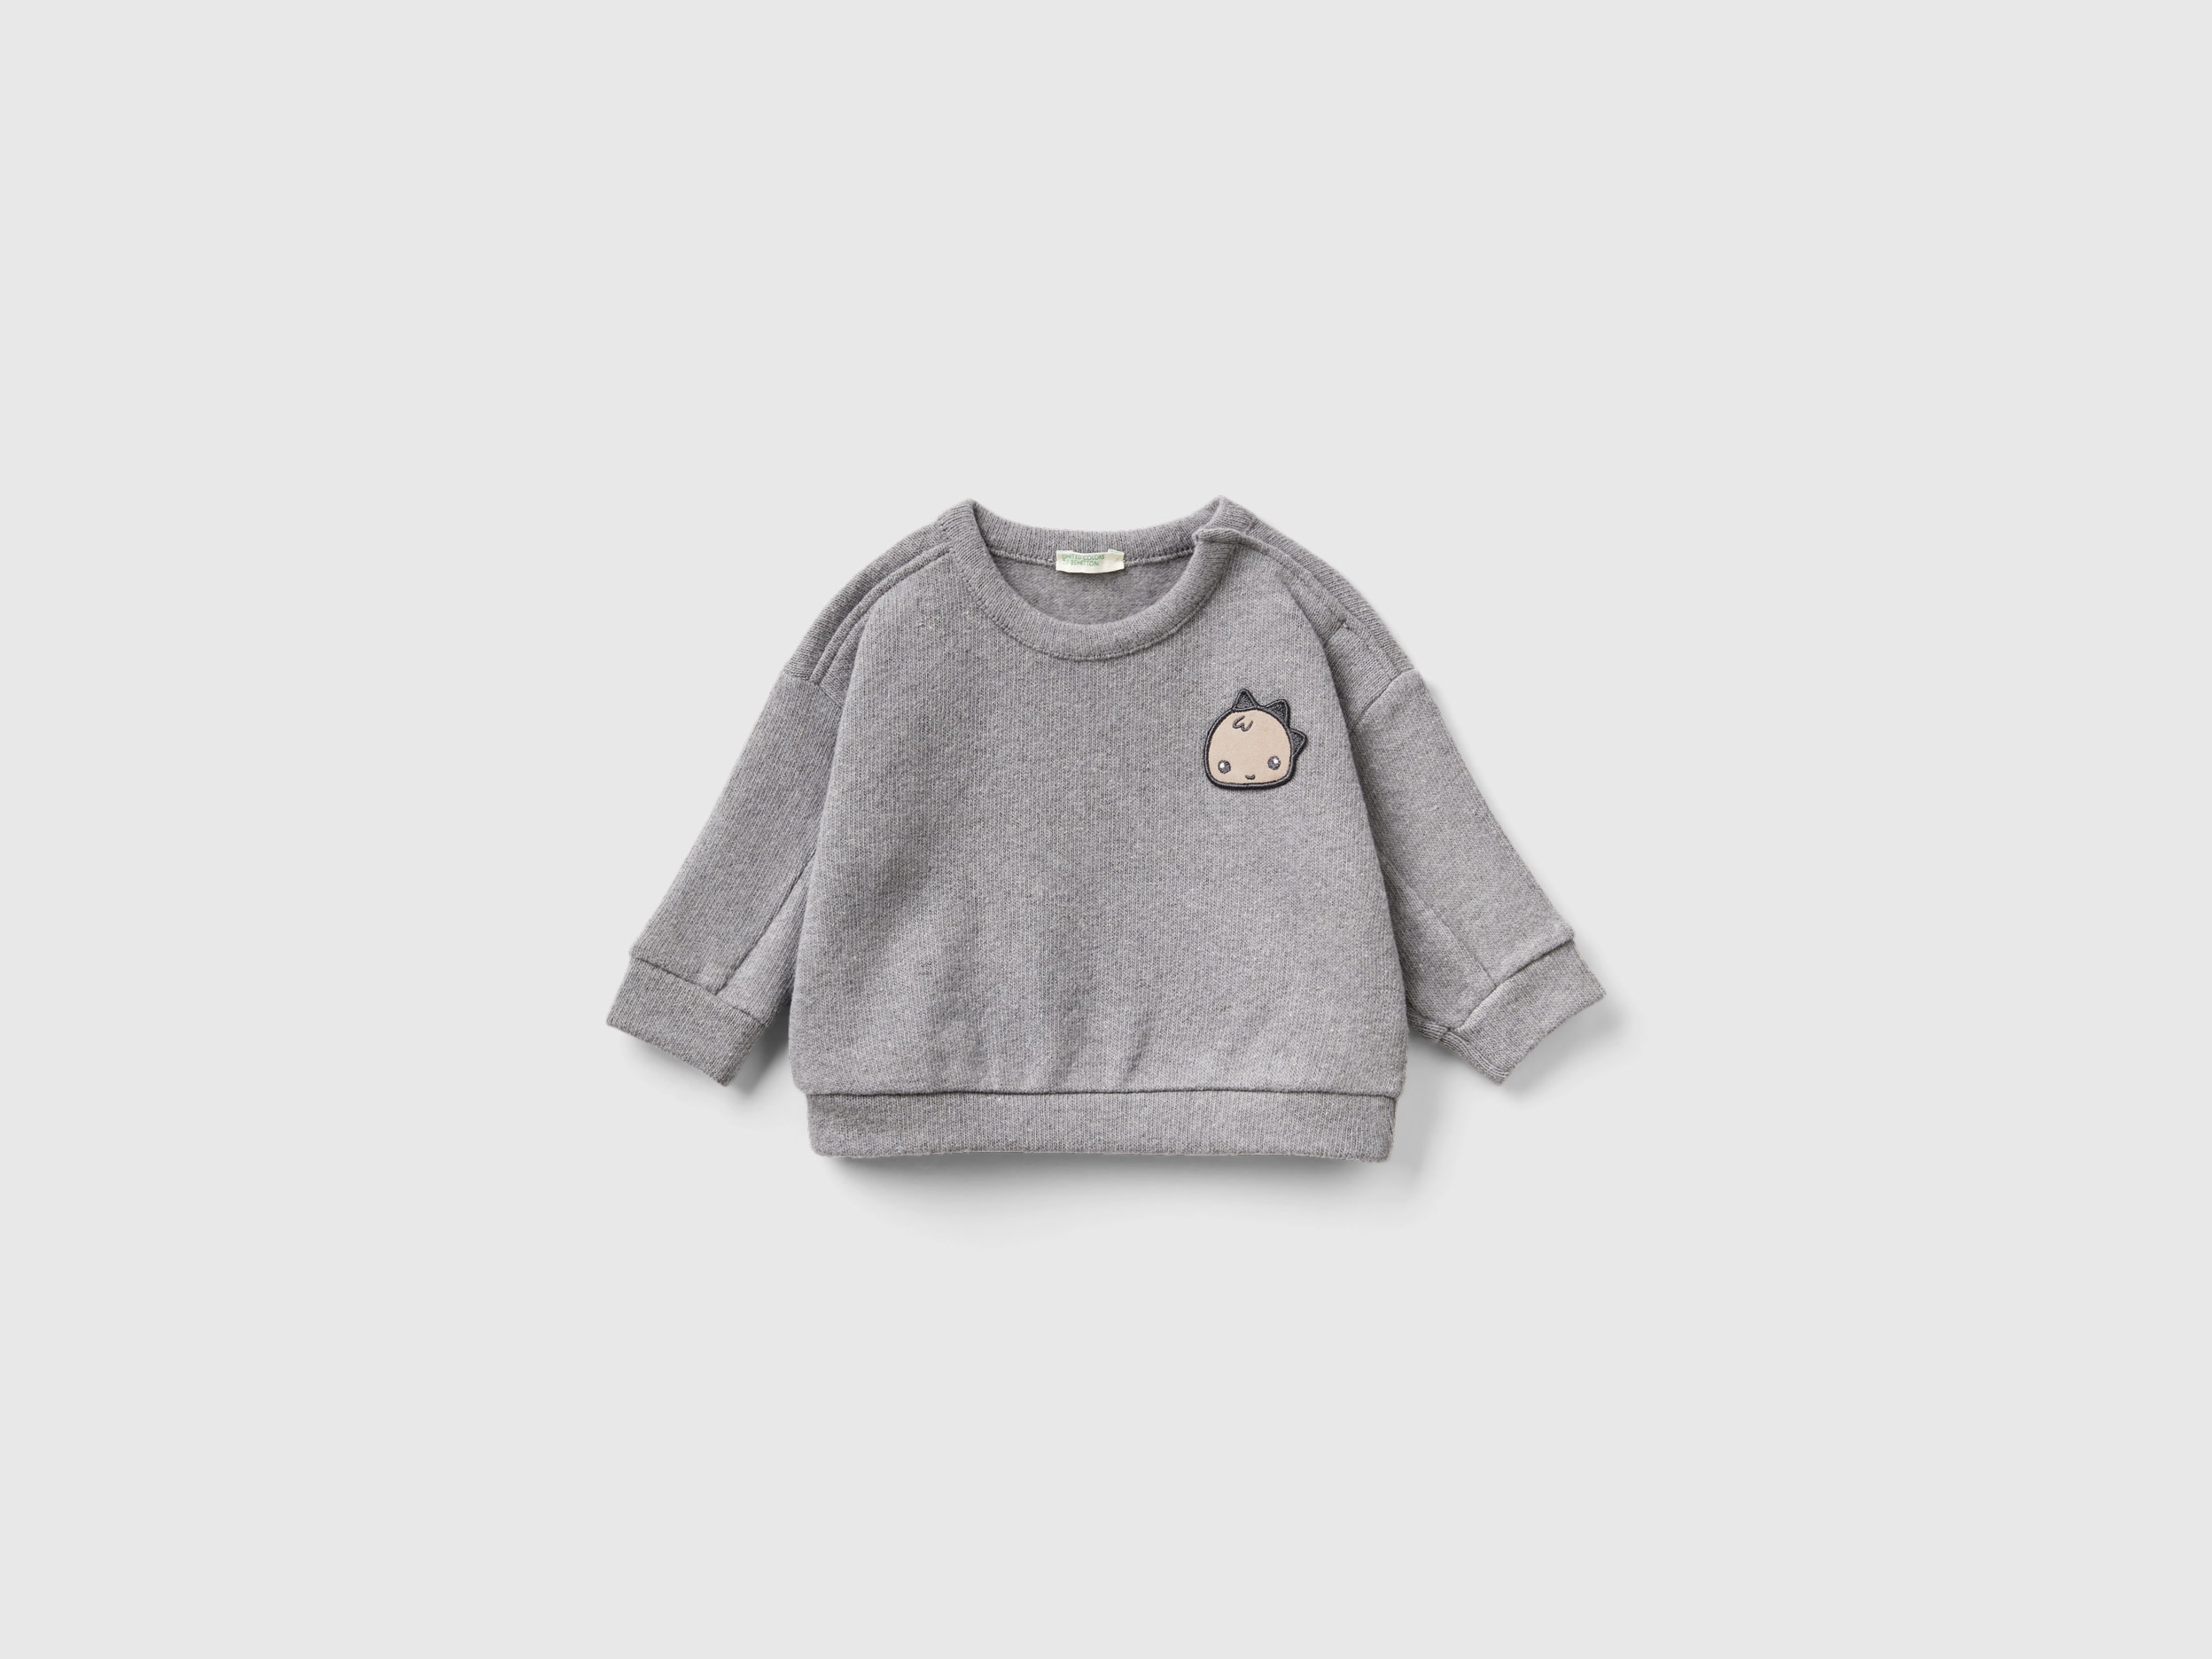 Benetton, Sweatshirt In Recycled Cotton Blend, size 6-9, Gray, Kids